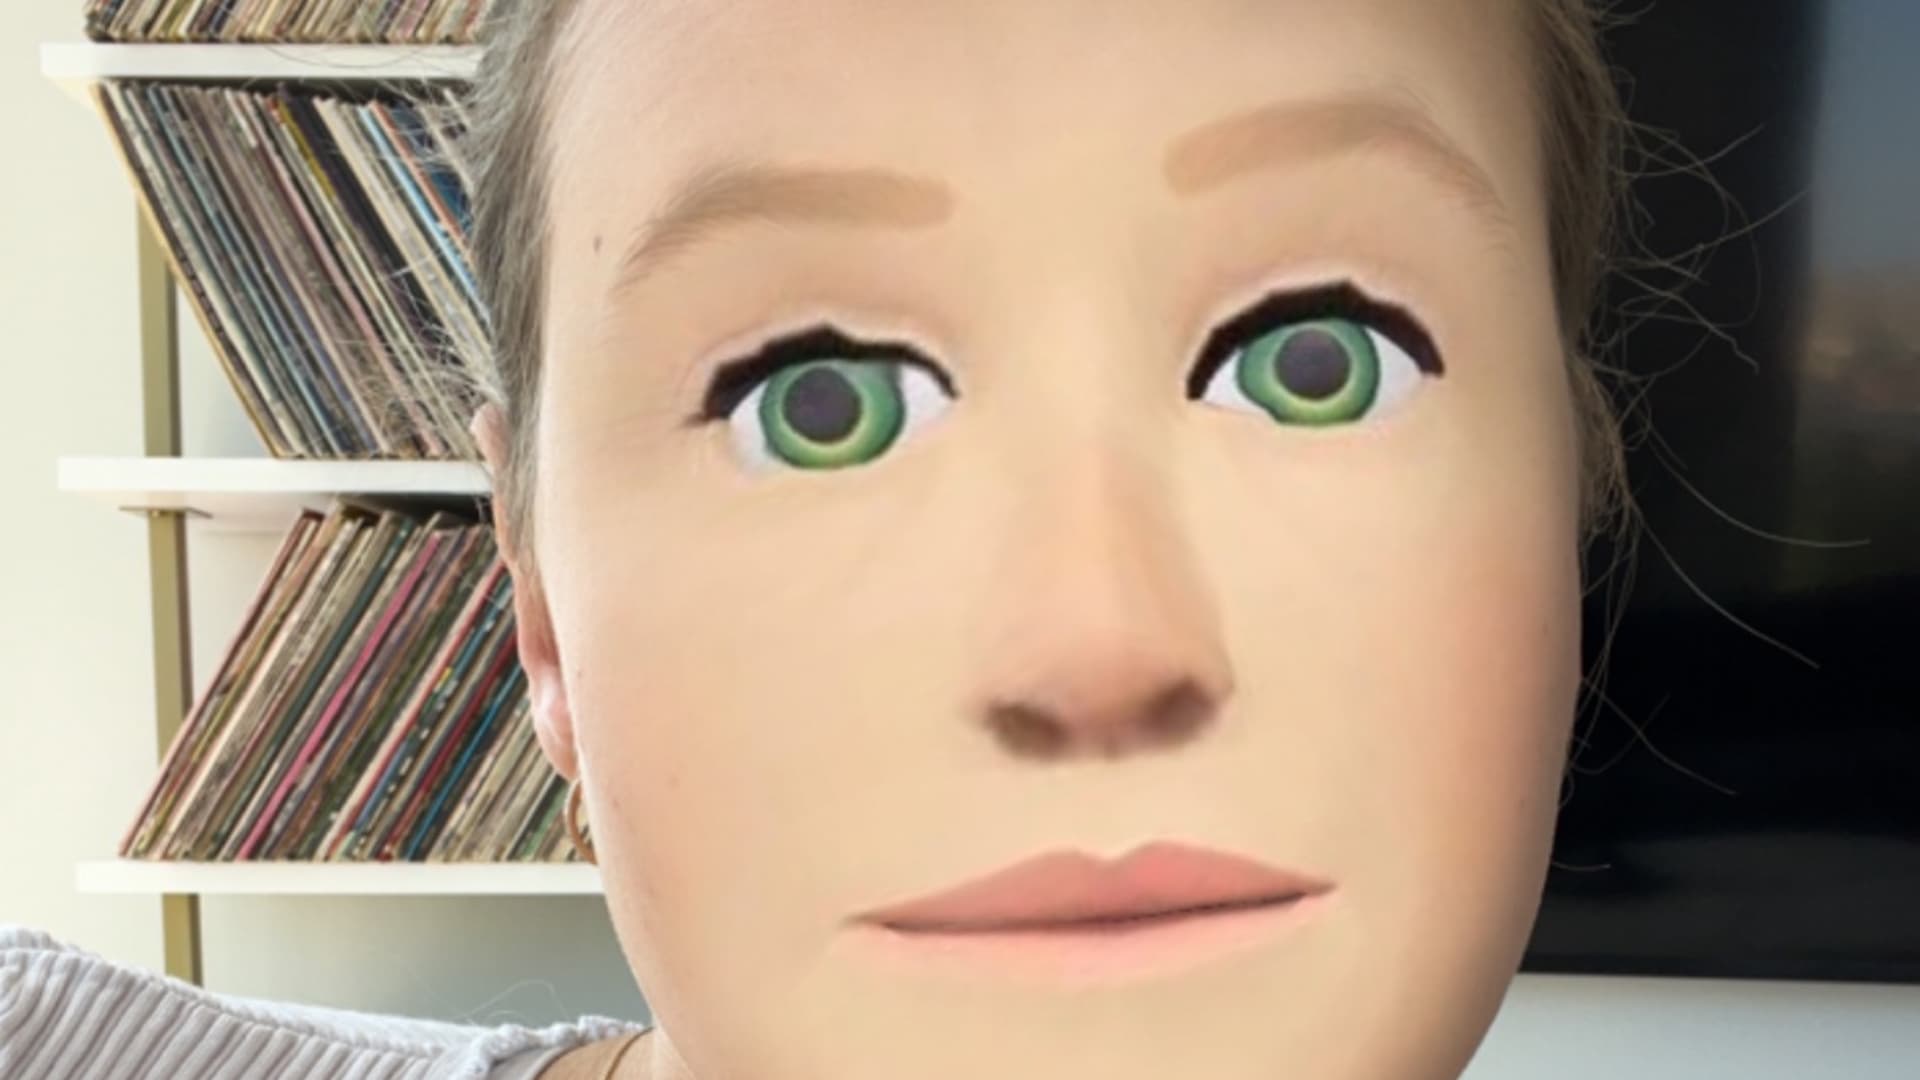 This Snapchat filter turned me into Mark Zuckerberg's viral avatar